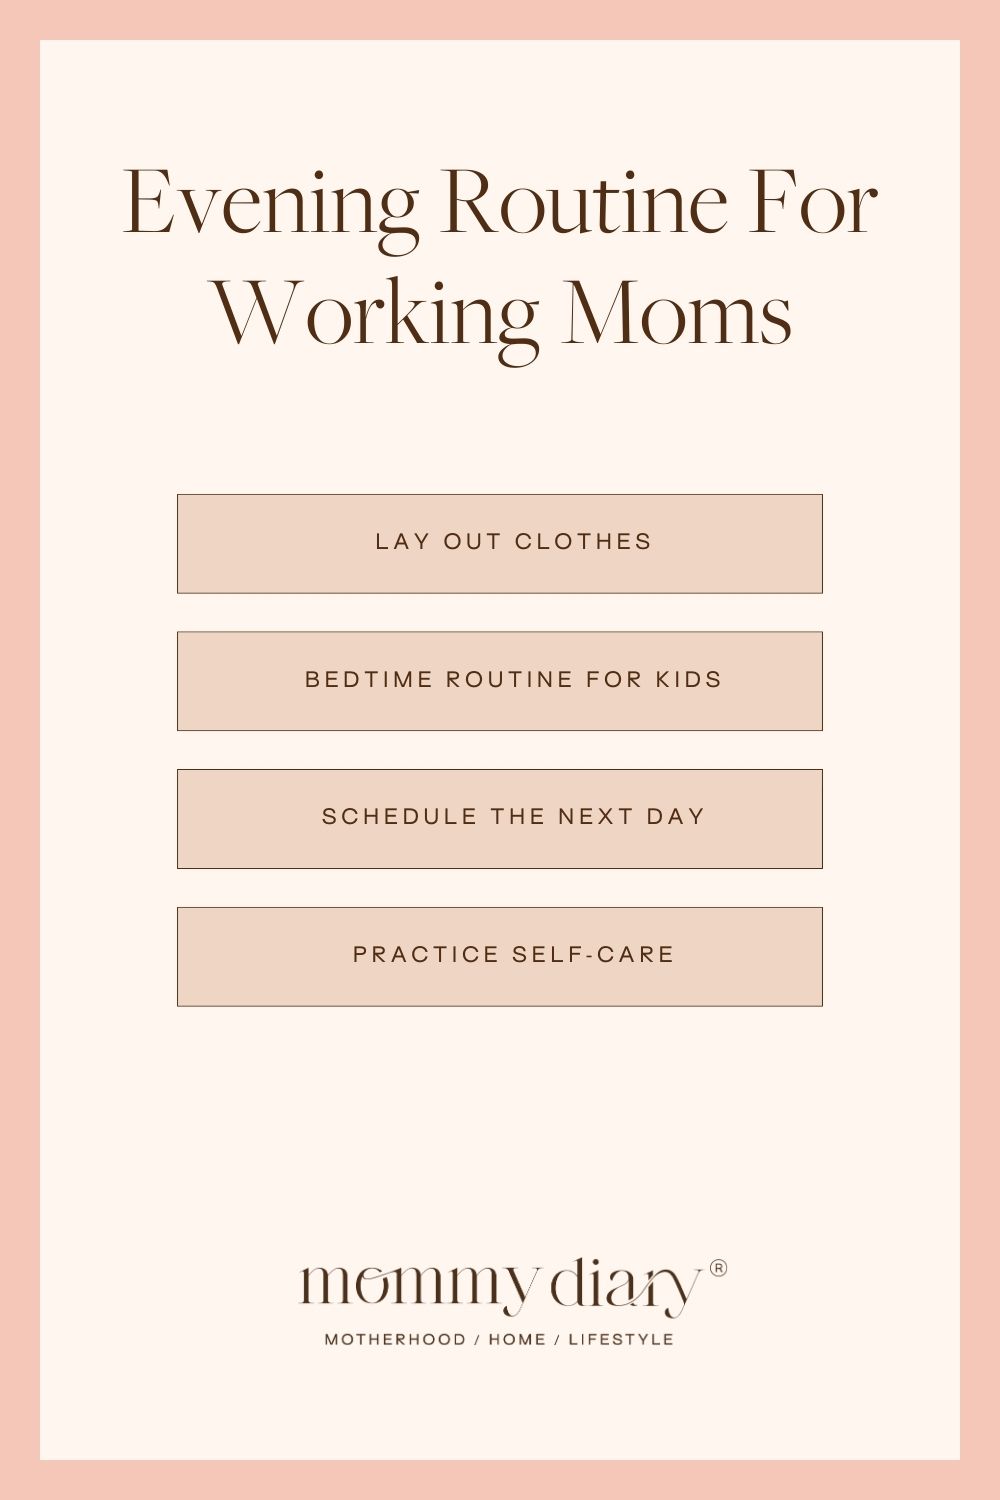 Evening Routine For Working Moms